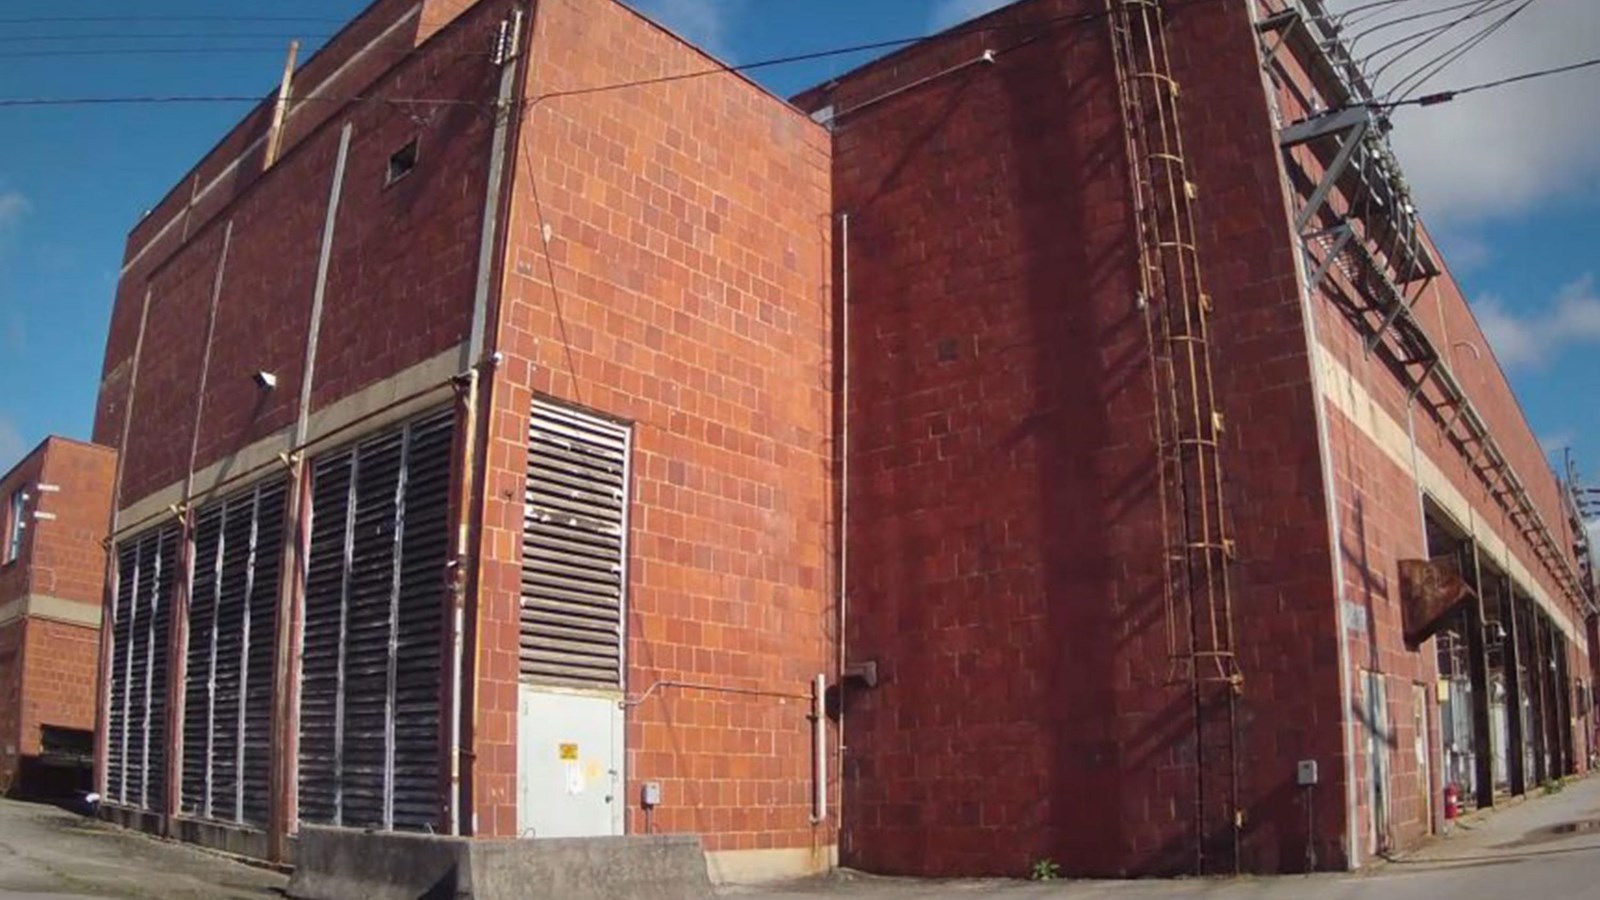 A multi-story red brick building with limited windows/doors